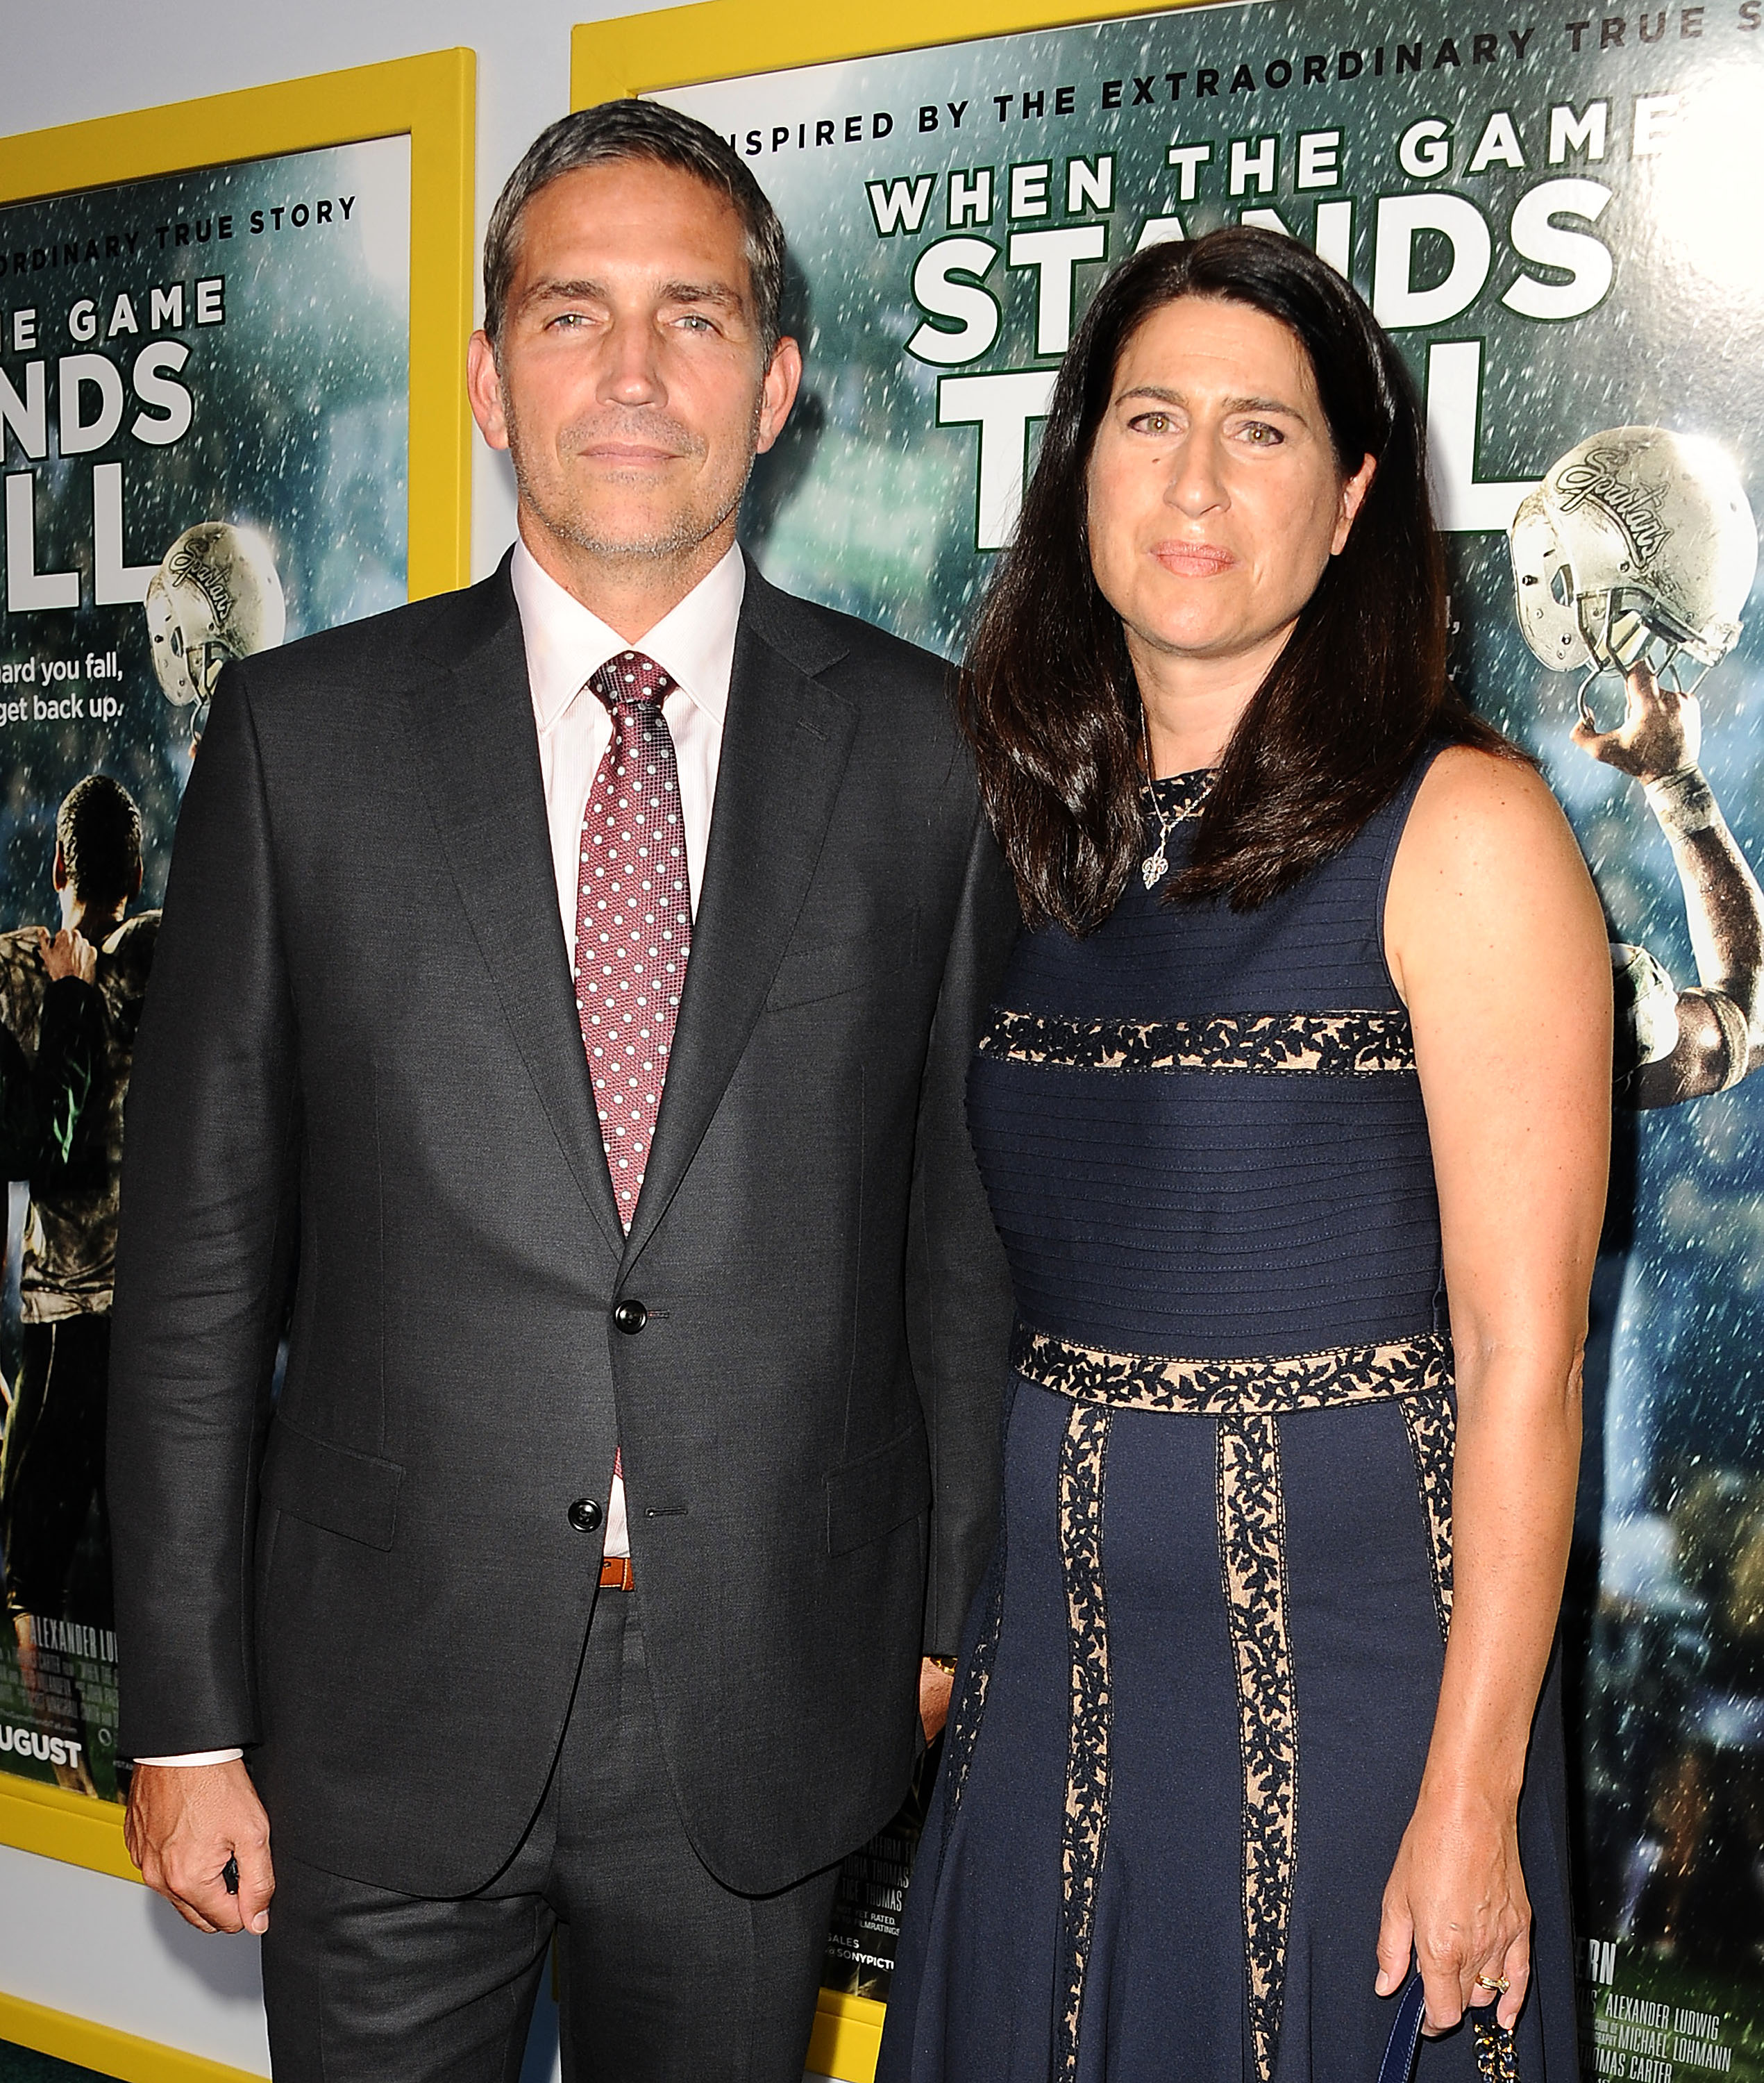 Jim Caviezel and his wife Kerri Browitt Caviezel attend the premiere of "When The Game Stands Tall" at ArcLight Hollywood on August 4, 2014, in Hollywood, California. | Source: Getty Images